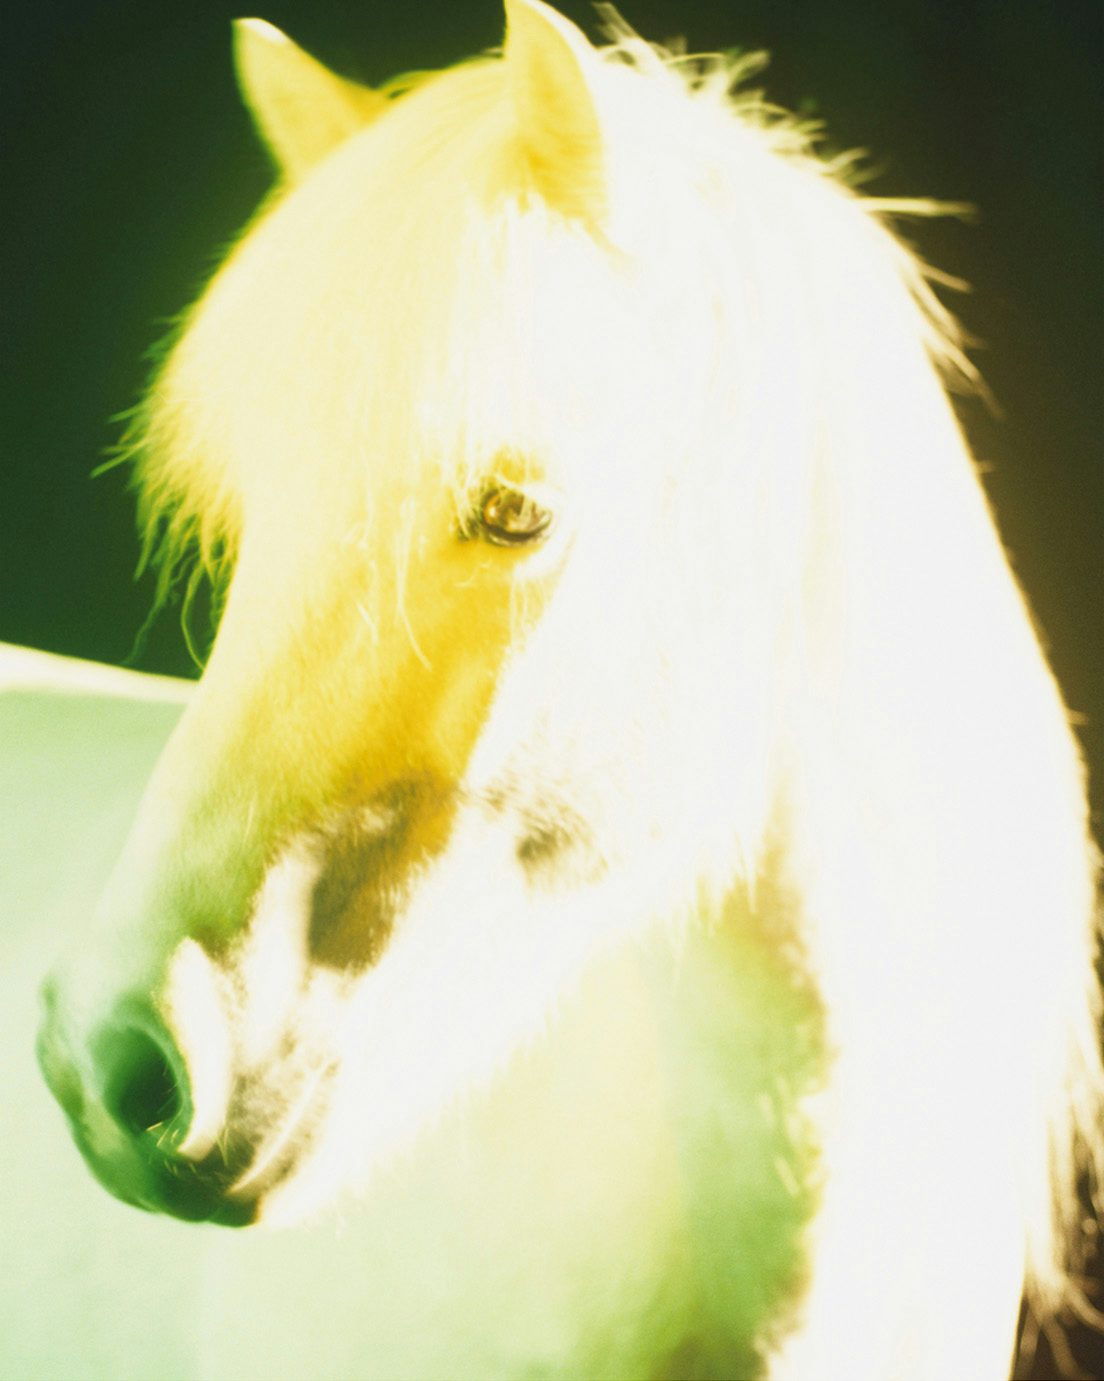 Image by Gareth McConnell from his project The Horses, which shows a close-up shot of a horse illuminated with bright lighting